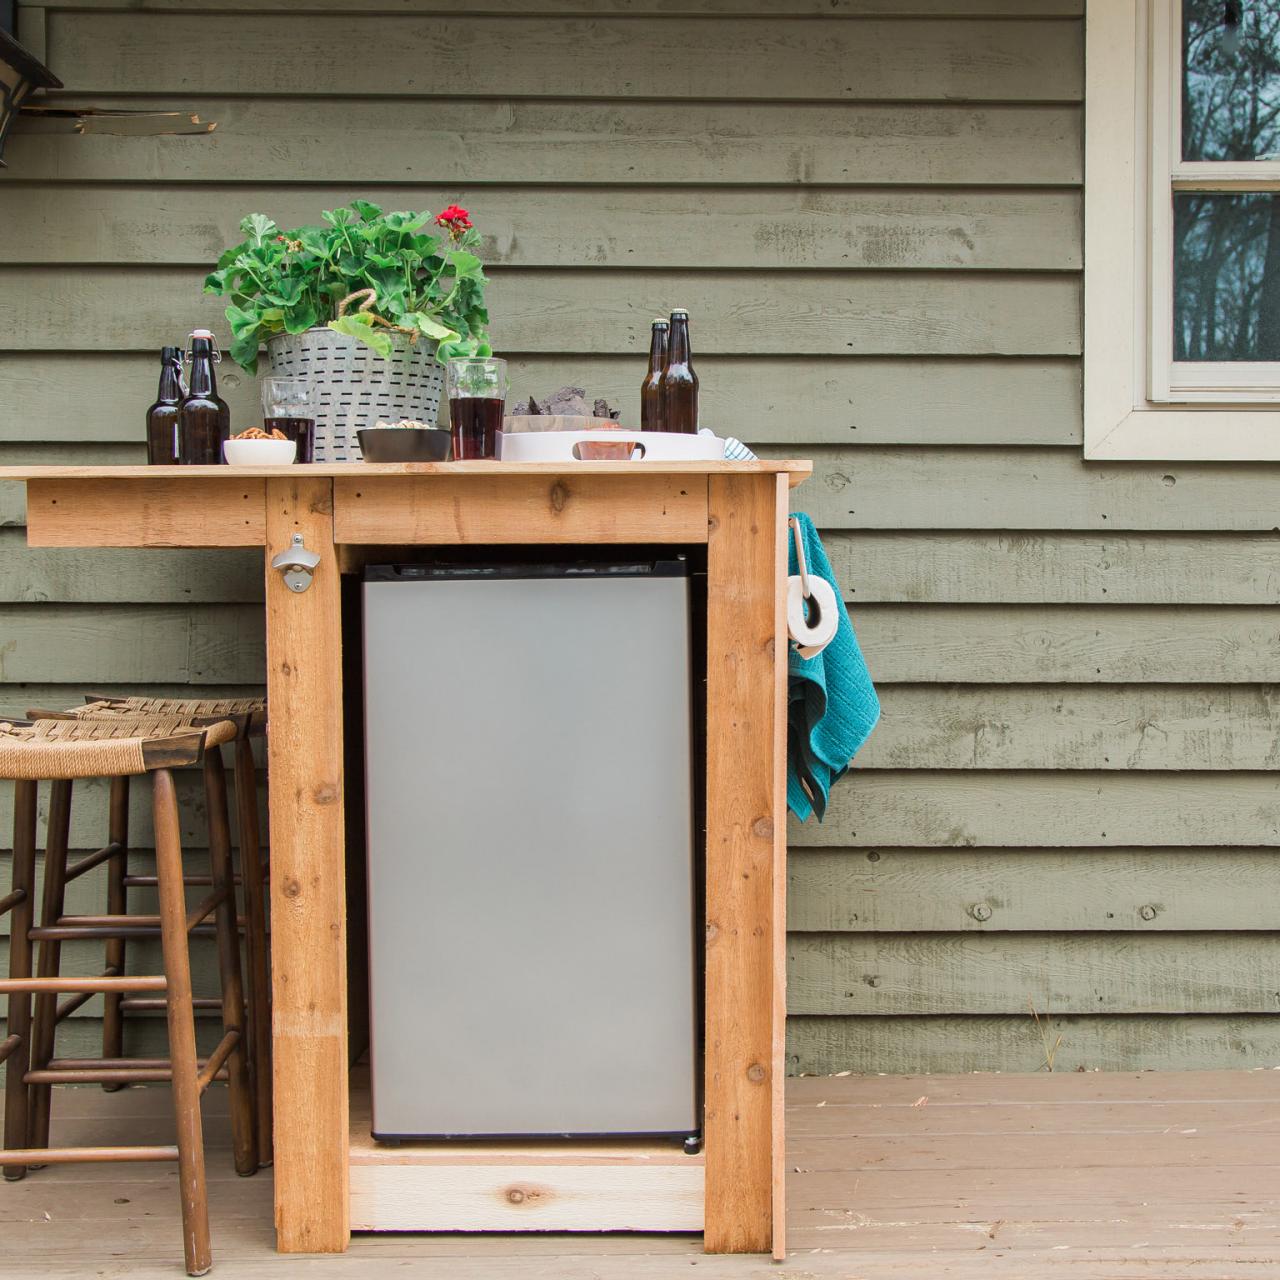 How To Make A Buffet - That Holds A Mini-Fridge — the Awesome Orange